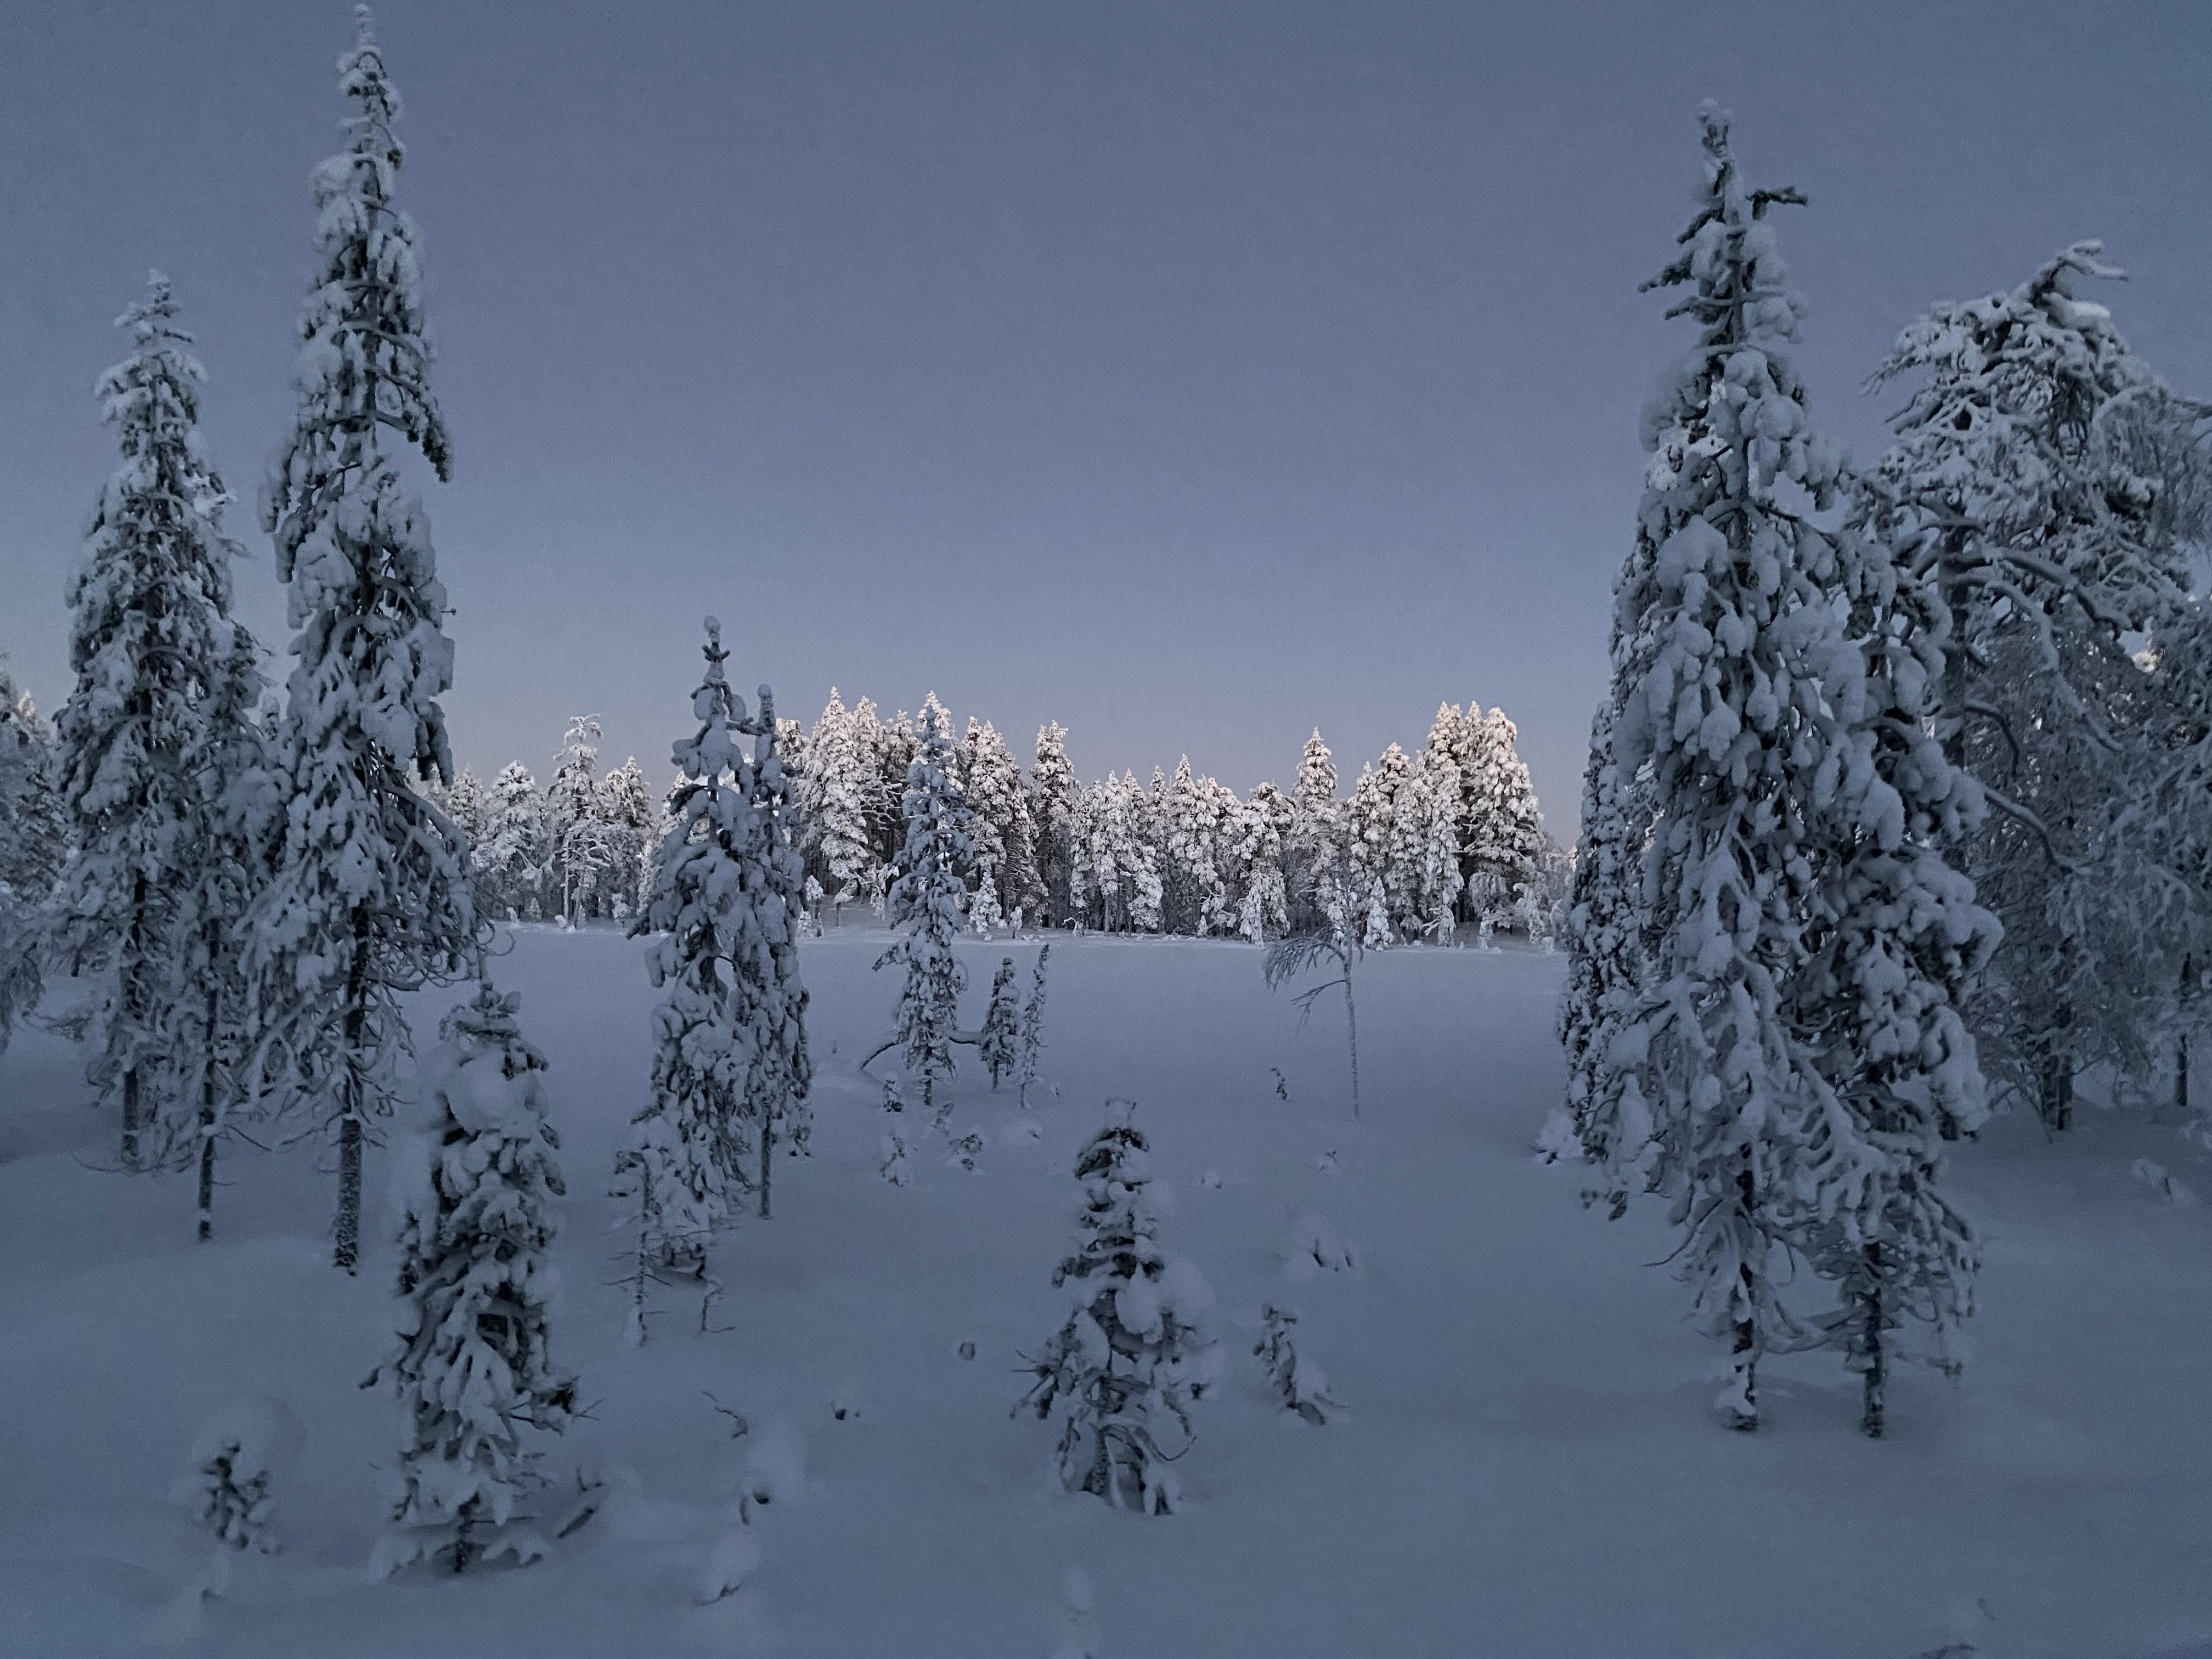 In Finnish Lapland, it’s -34.8C, hard driving conditions in the west